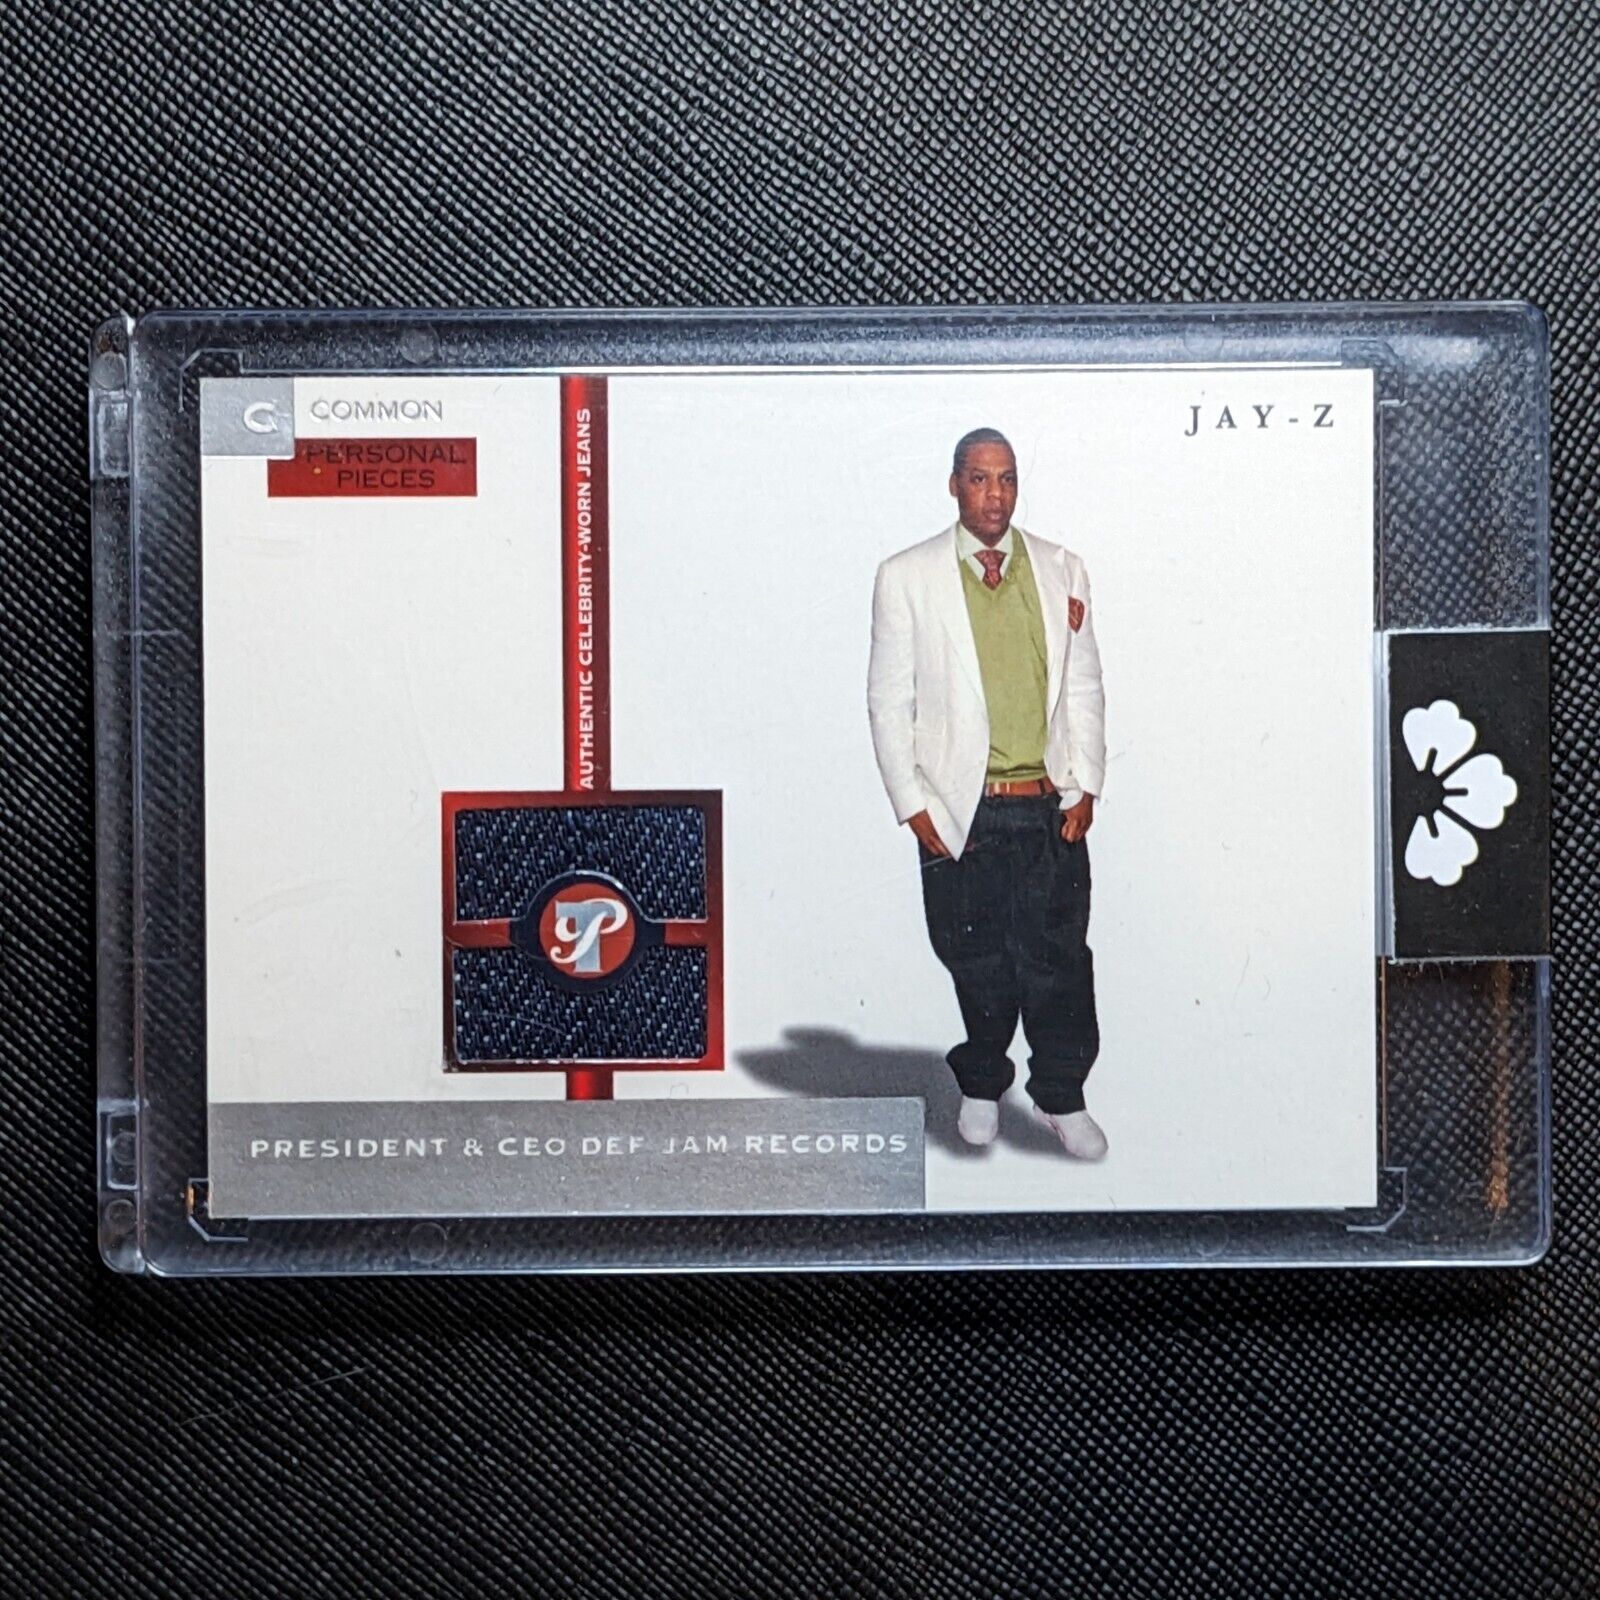 2005-06 Topps Pristine Jay-Z  Personal Pieces Jeans Patch Relic /350